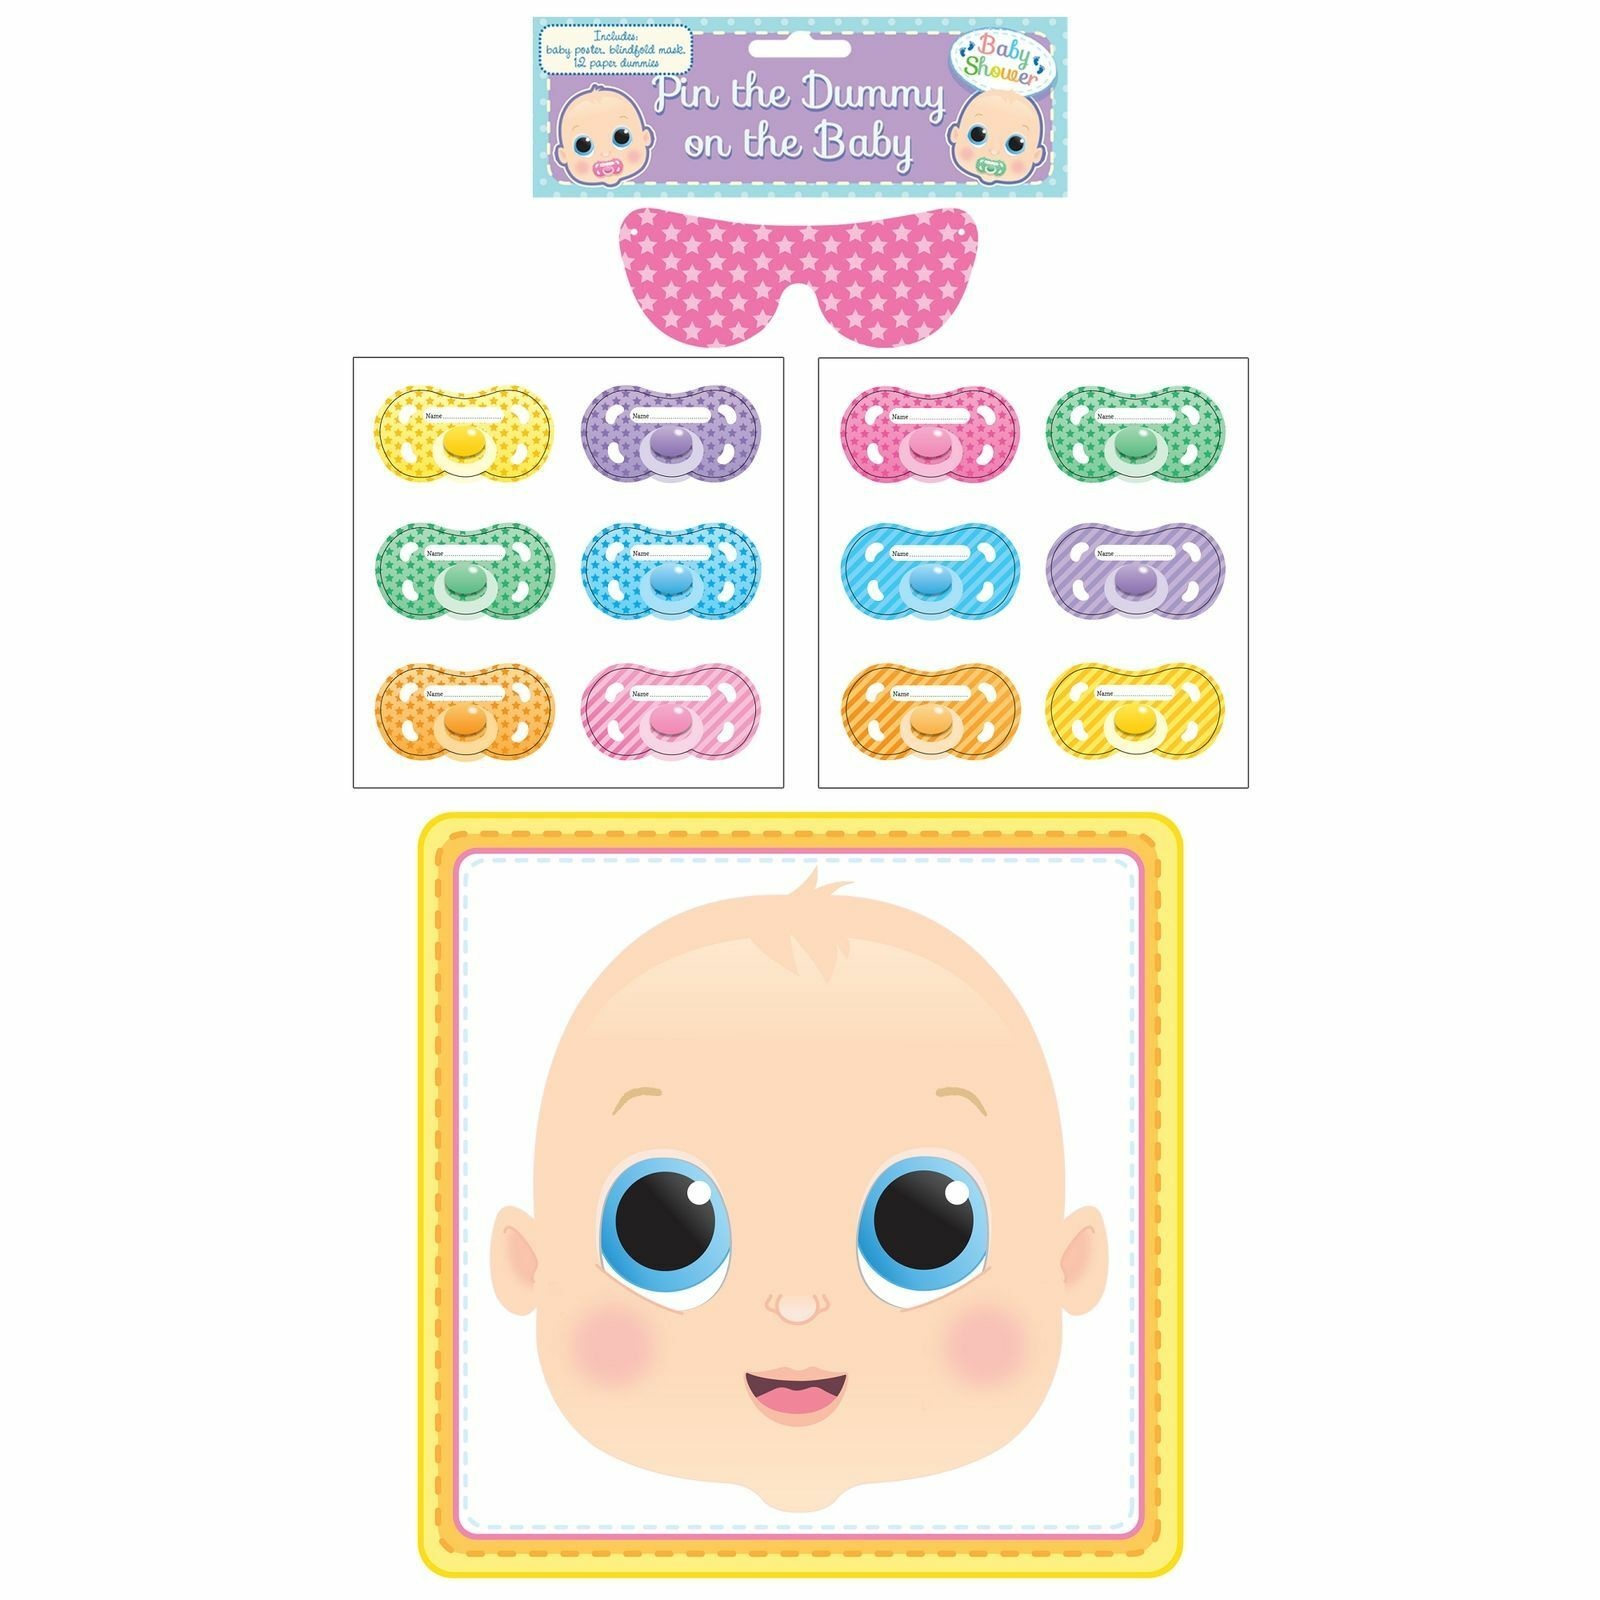 Pin Dummy On The Baby Fun Party Game Shower Celebration Sticker For - Pin The Dummy On The Baby Free Printable